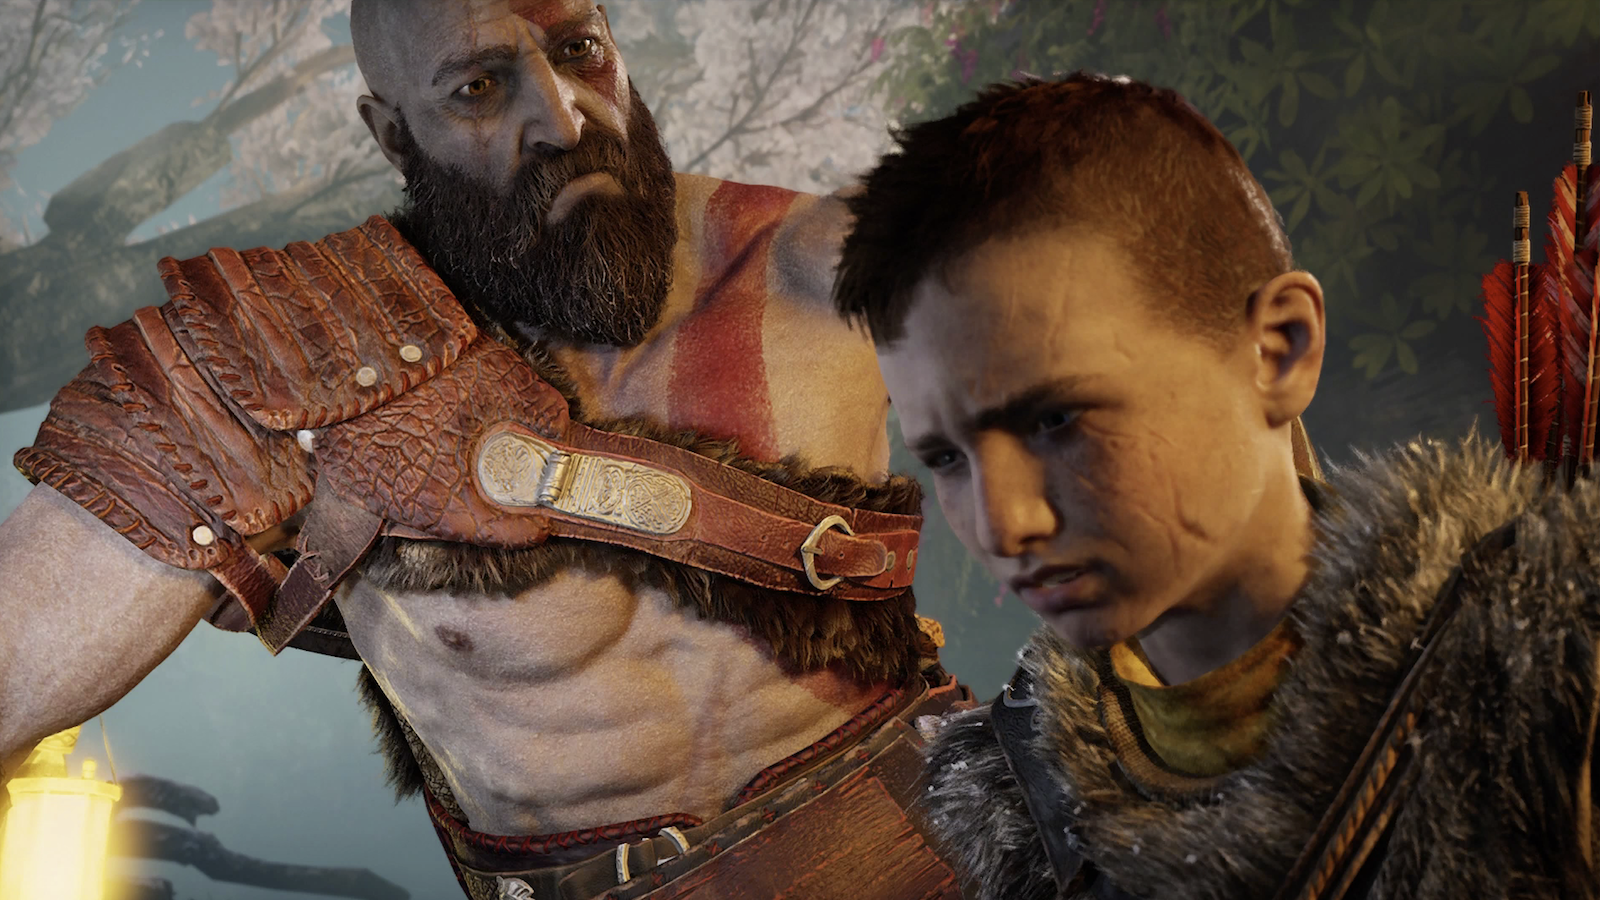 Thor, Ragnarok, and every other wild fan theory about what Kratos is up to  in God of War